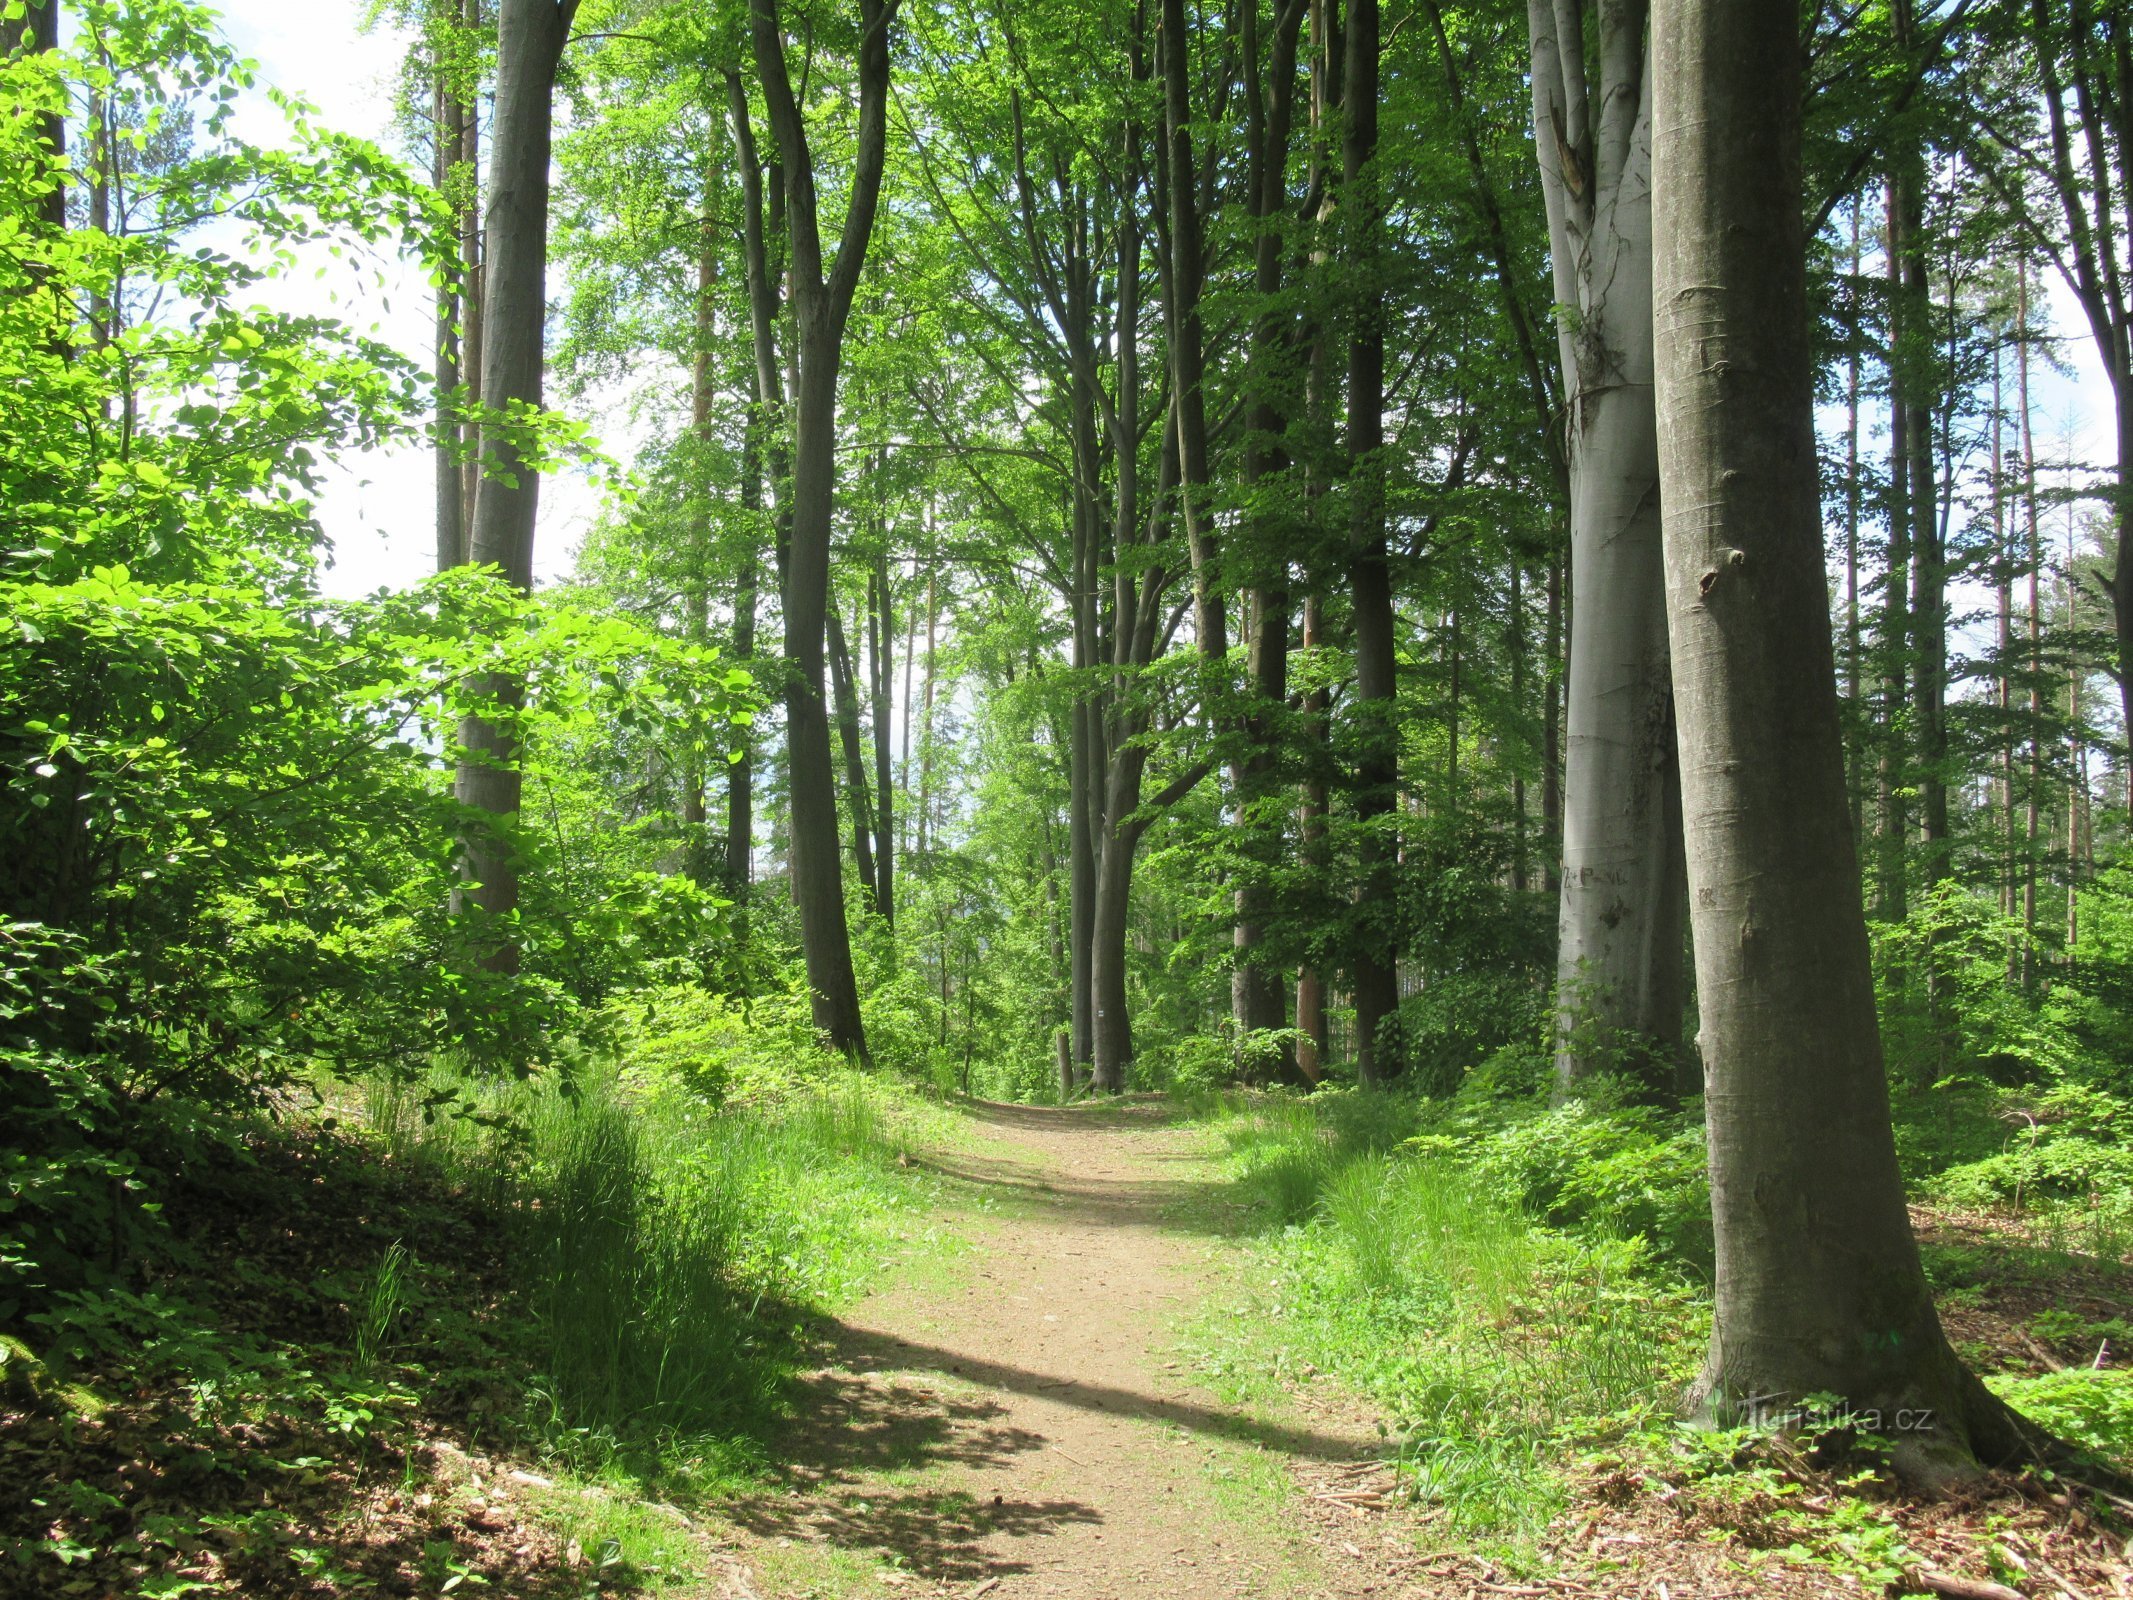 The route mostly leads through deciduous forests